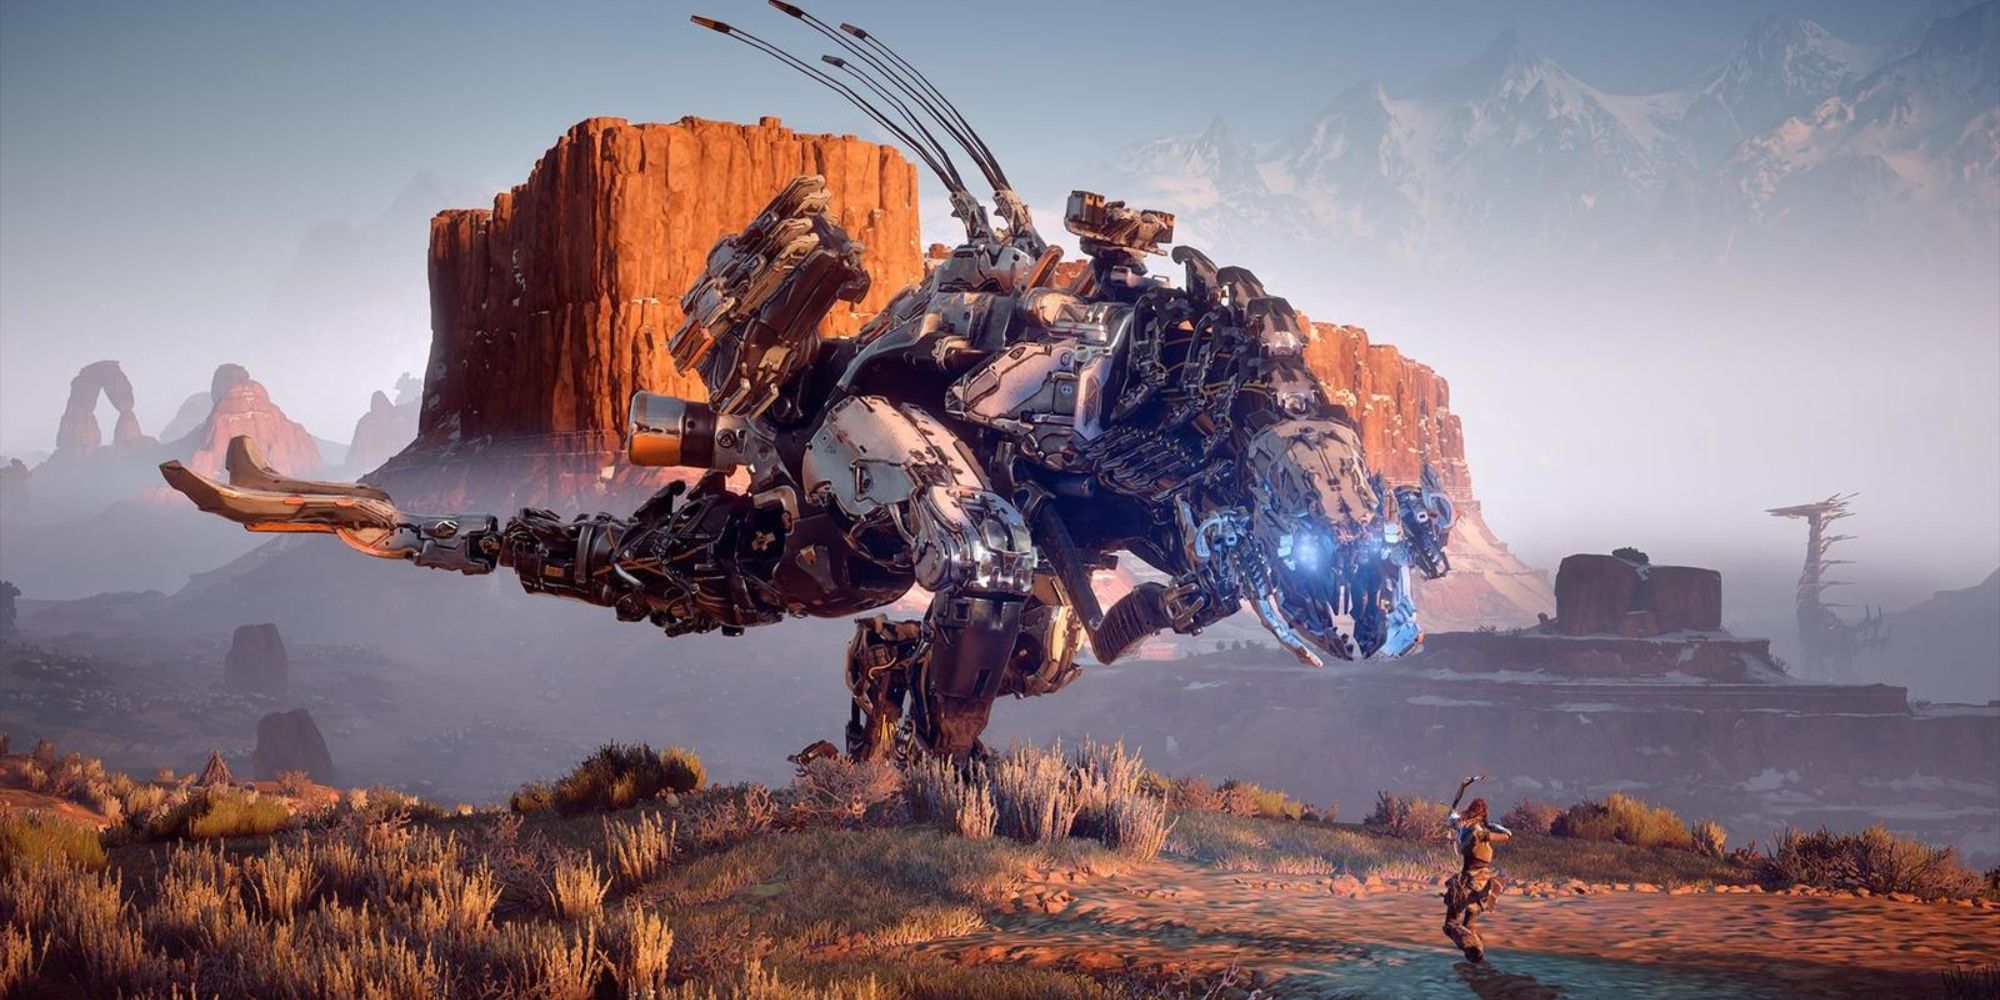 Extreme wide angle shot of Horizon Forbidden West's Thunderjaw towering over Aloy and aiming his bow